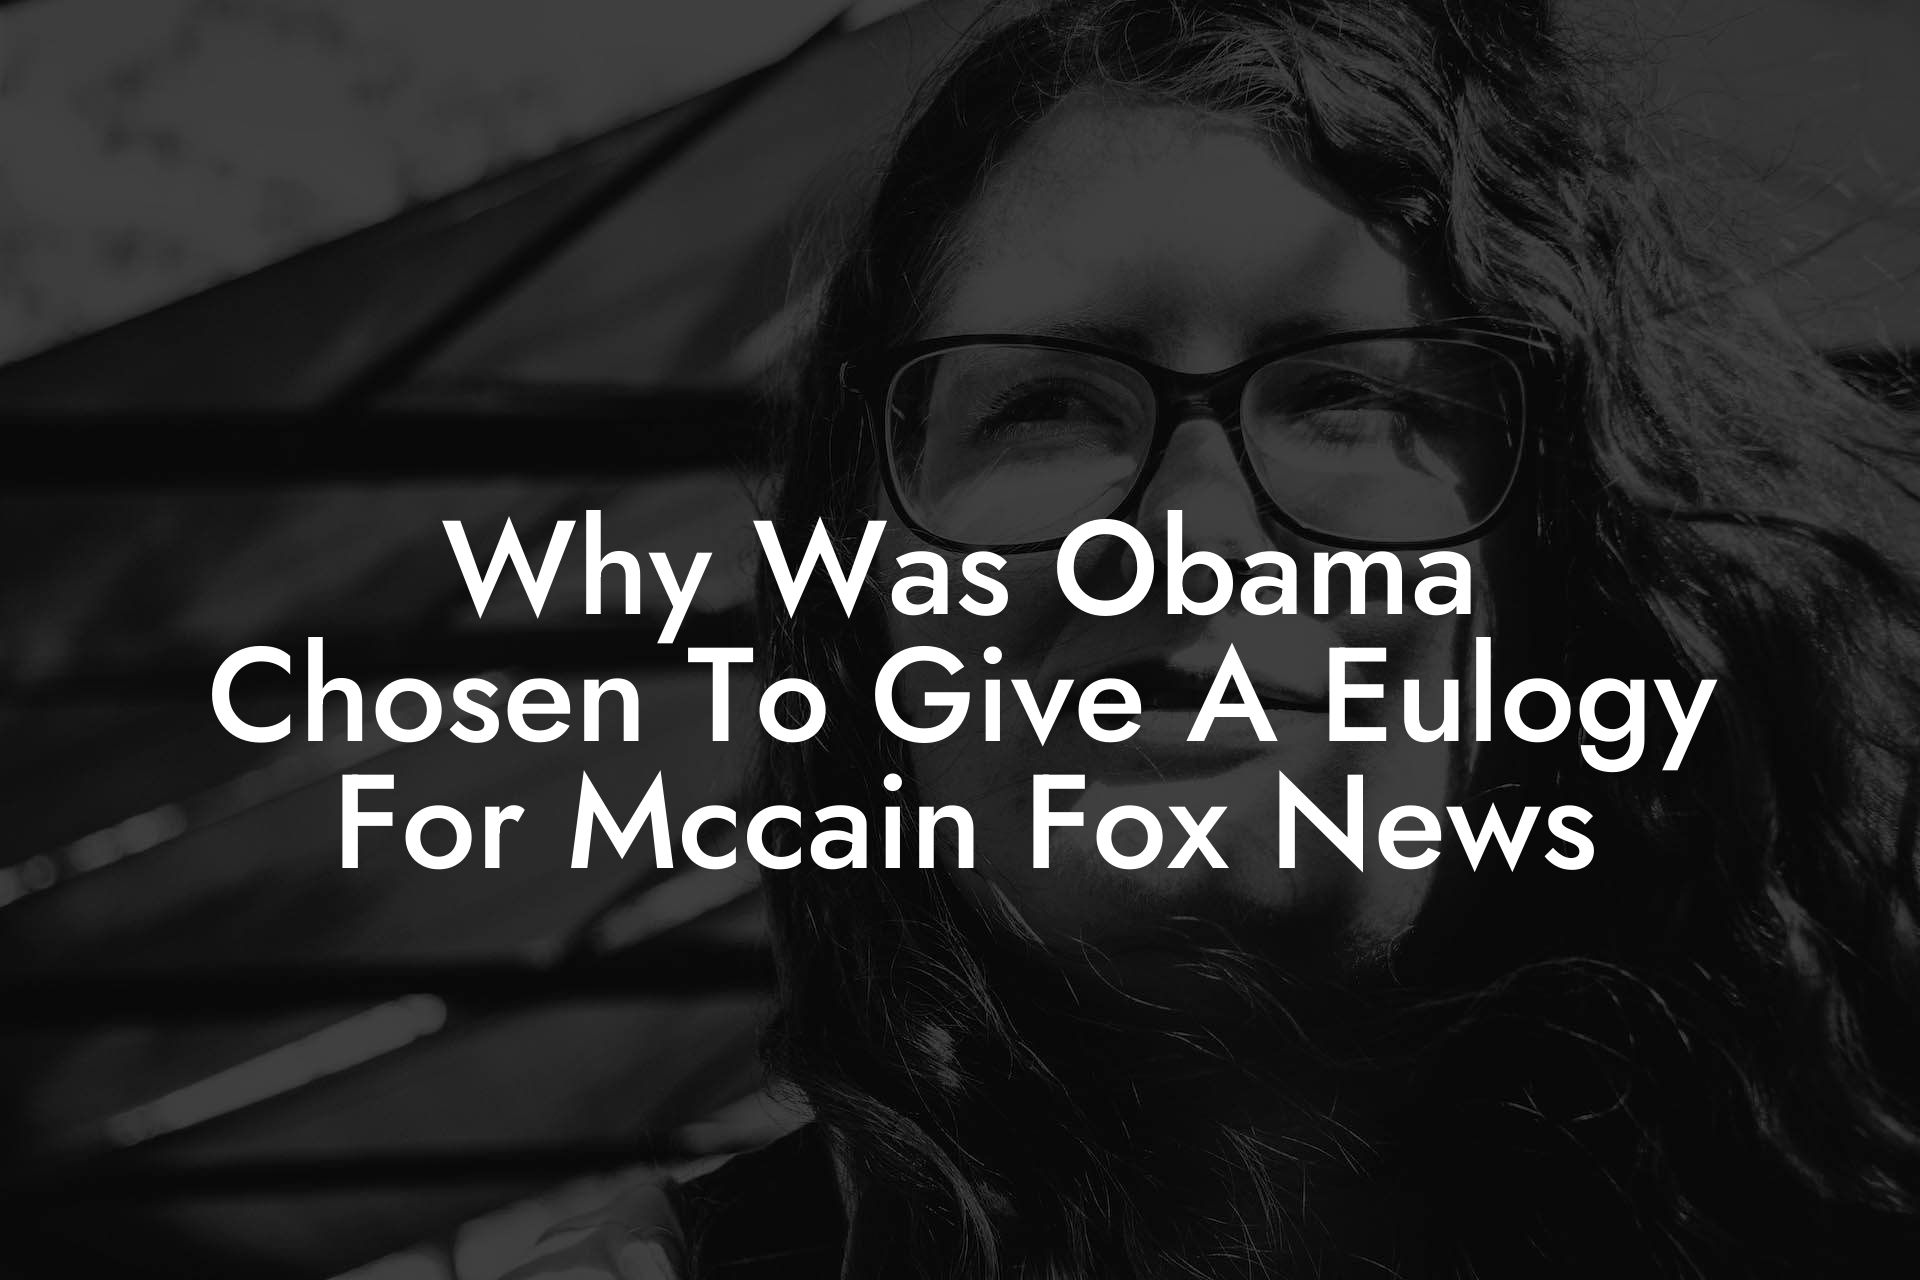 Why Was Obama Chosen To Give A Eulogy For Mccain Fox News